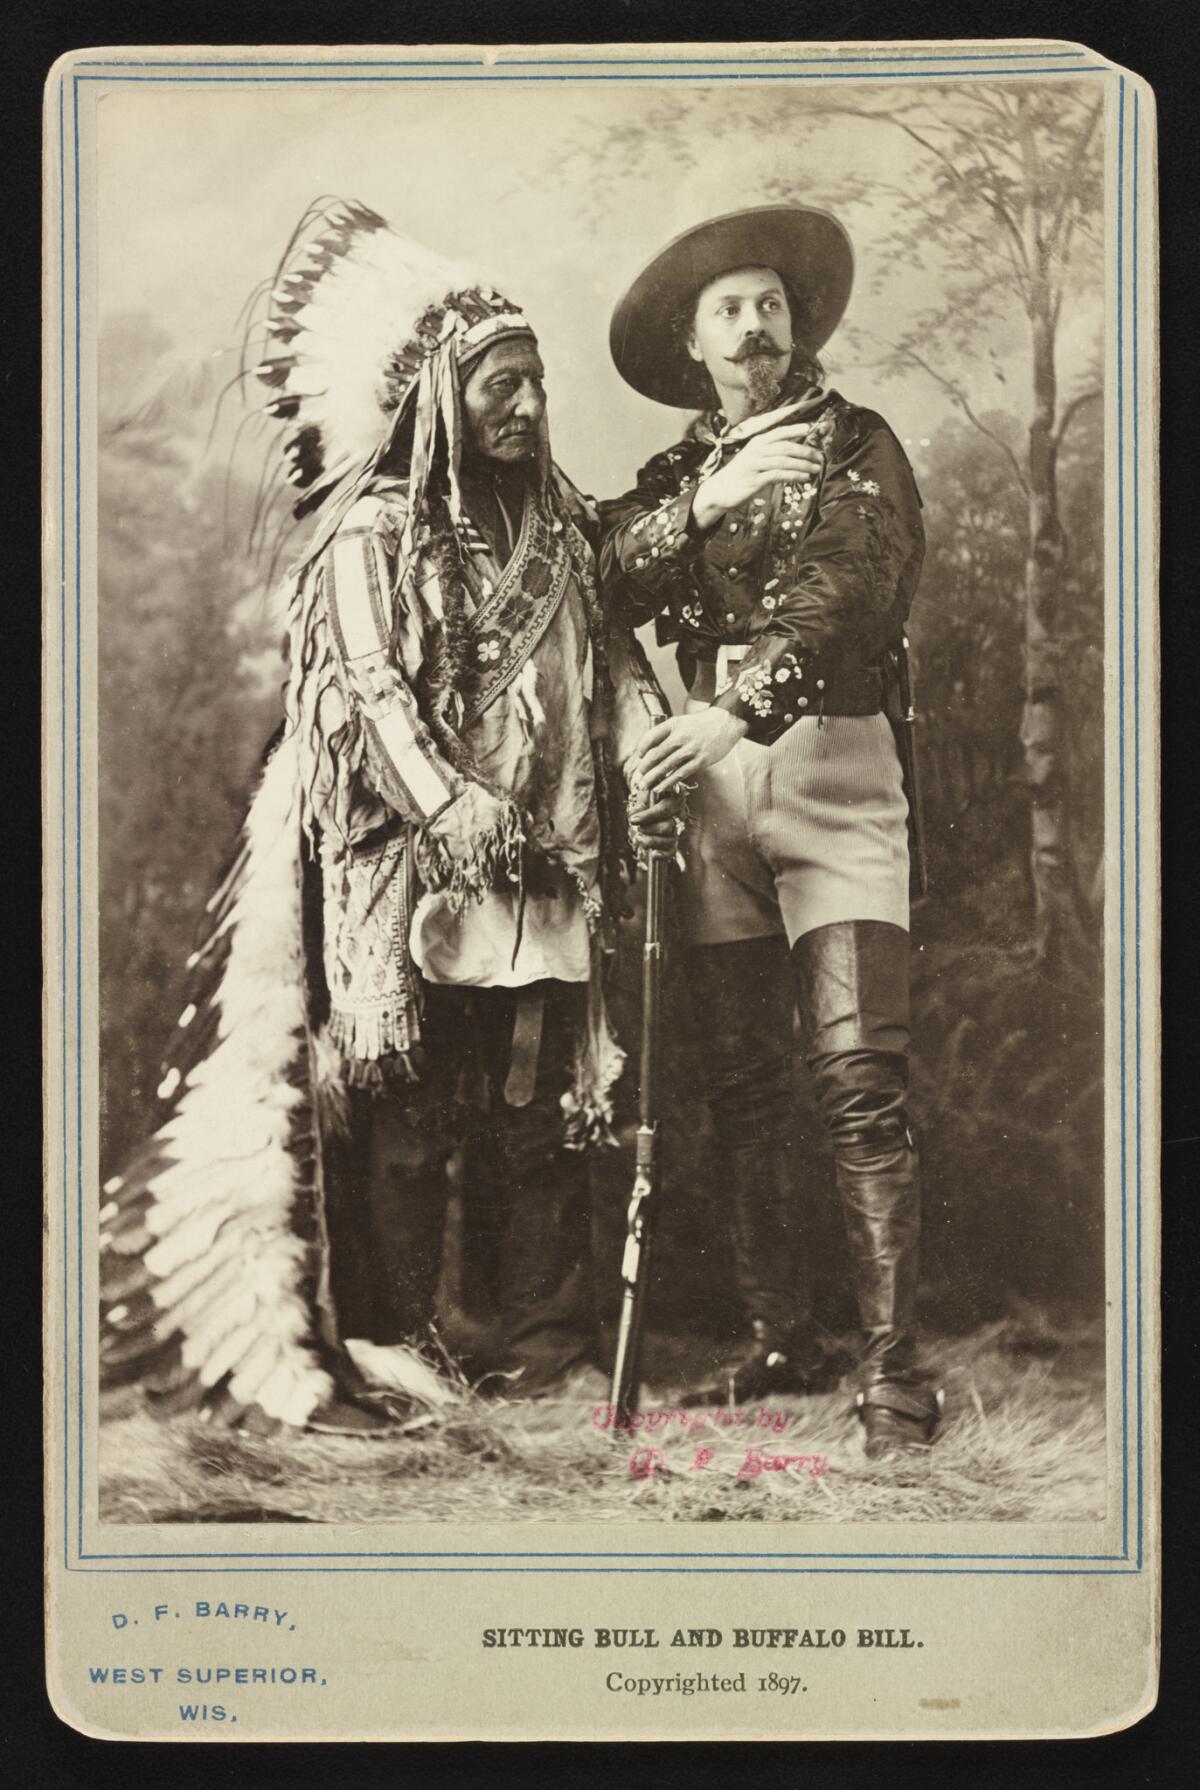 Sitting Bull, left, and Buffalo Bill in 1885. Early photography helped make the images of Plains Indians iconic.